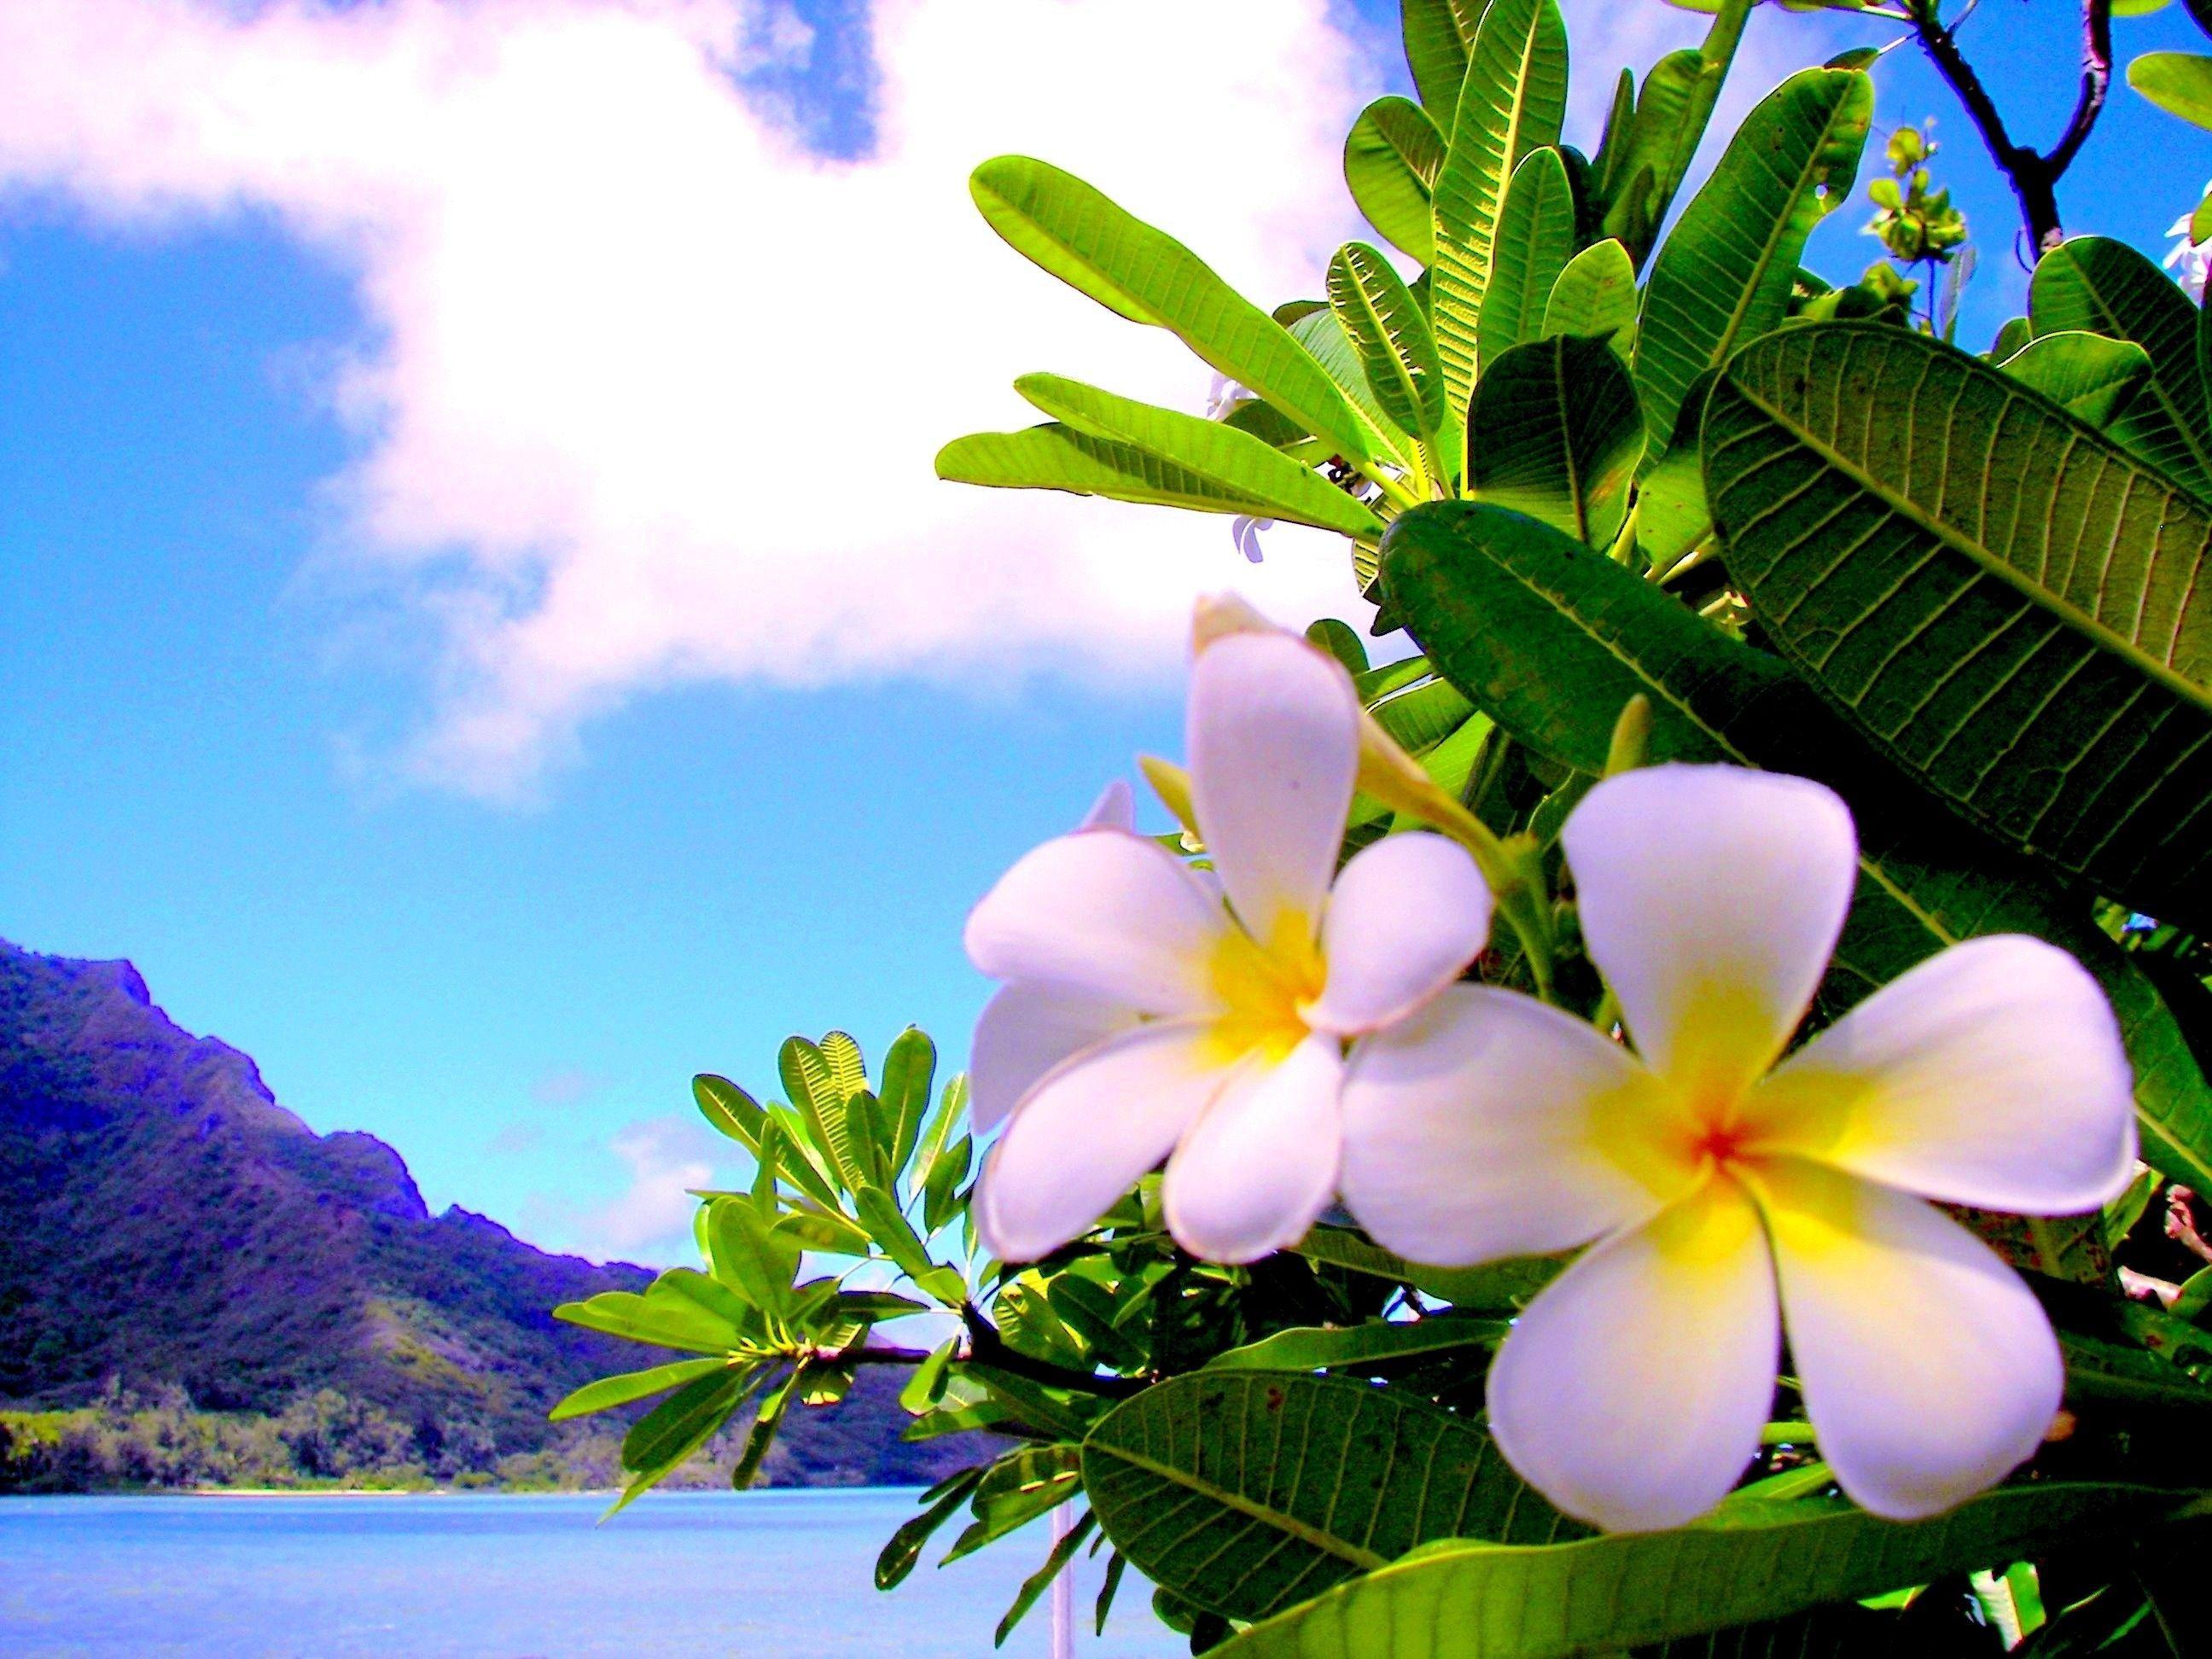 Awesome Hawaiian Flowers Wallpapers - Top Free Awesome Hawaiian Flowers ...